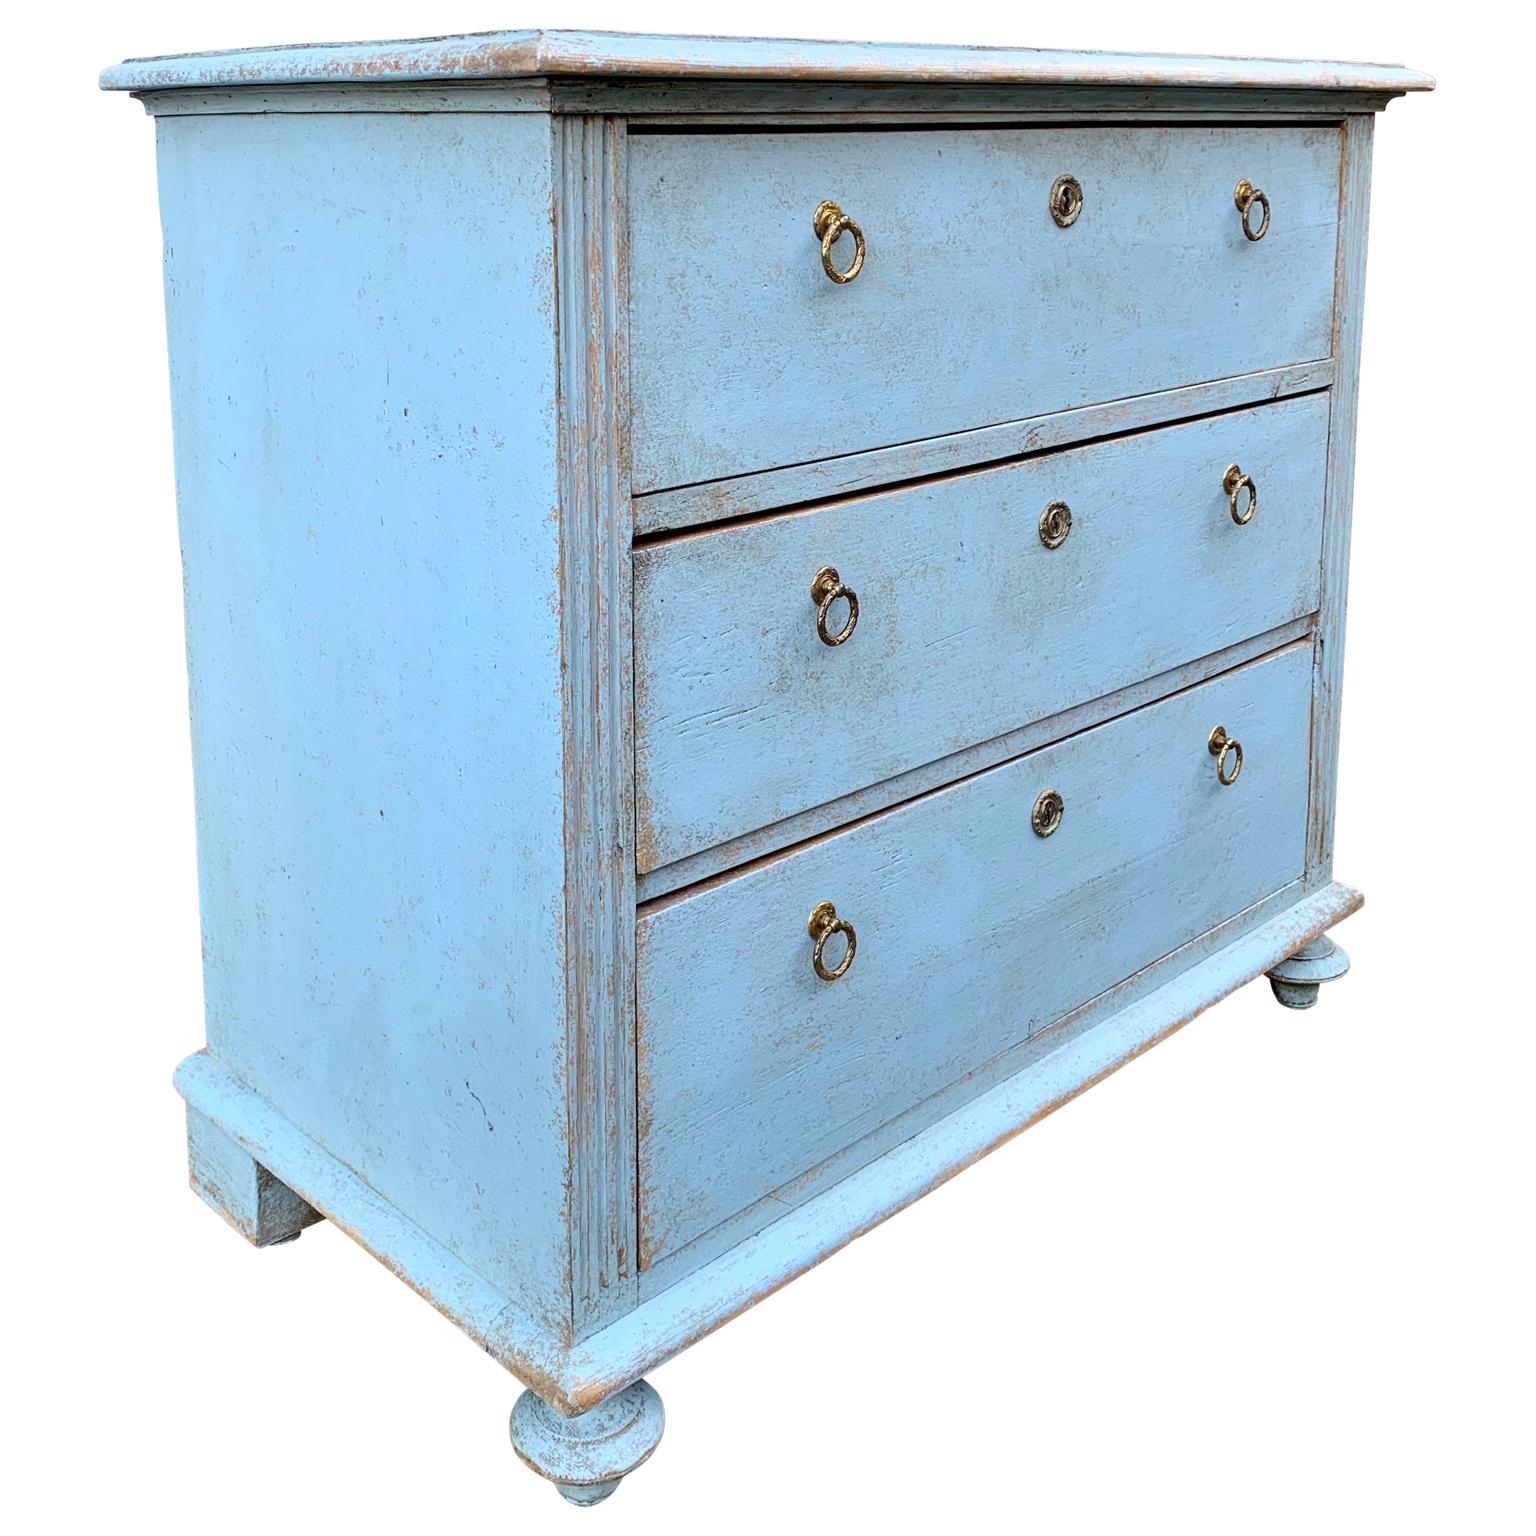 A late 19th century Swedish chest of drawers light blue painted in Gustavian Style.

Please note that this chest of drawers is located in Halmstad Sweden.
EUR 100 delivery to most areas of London UK, The Netherlands, Belgium, Denmark and Northern